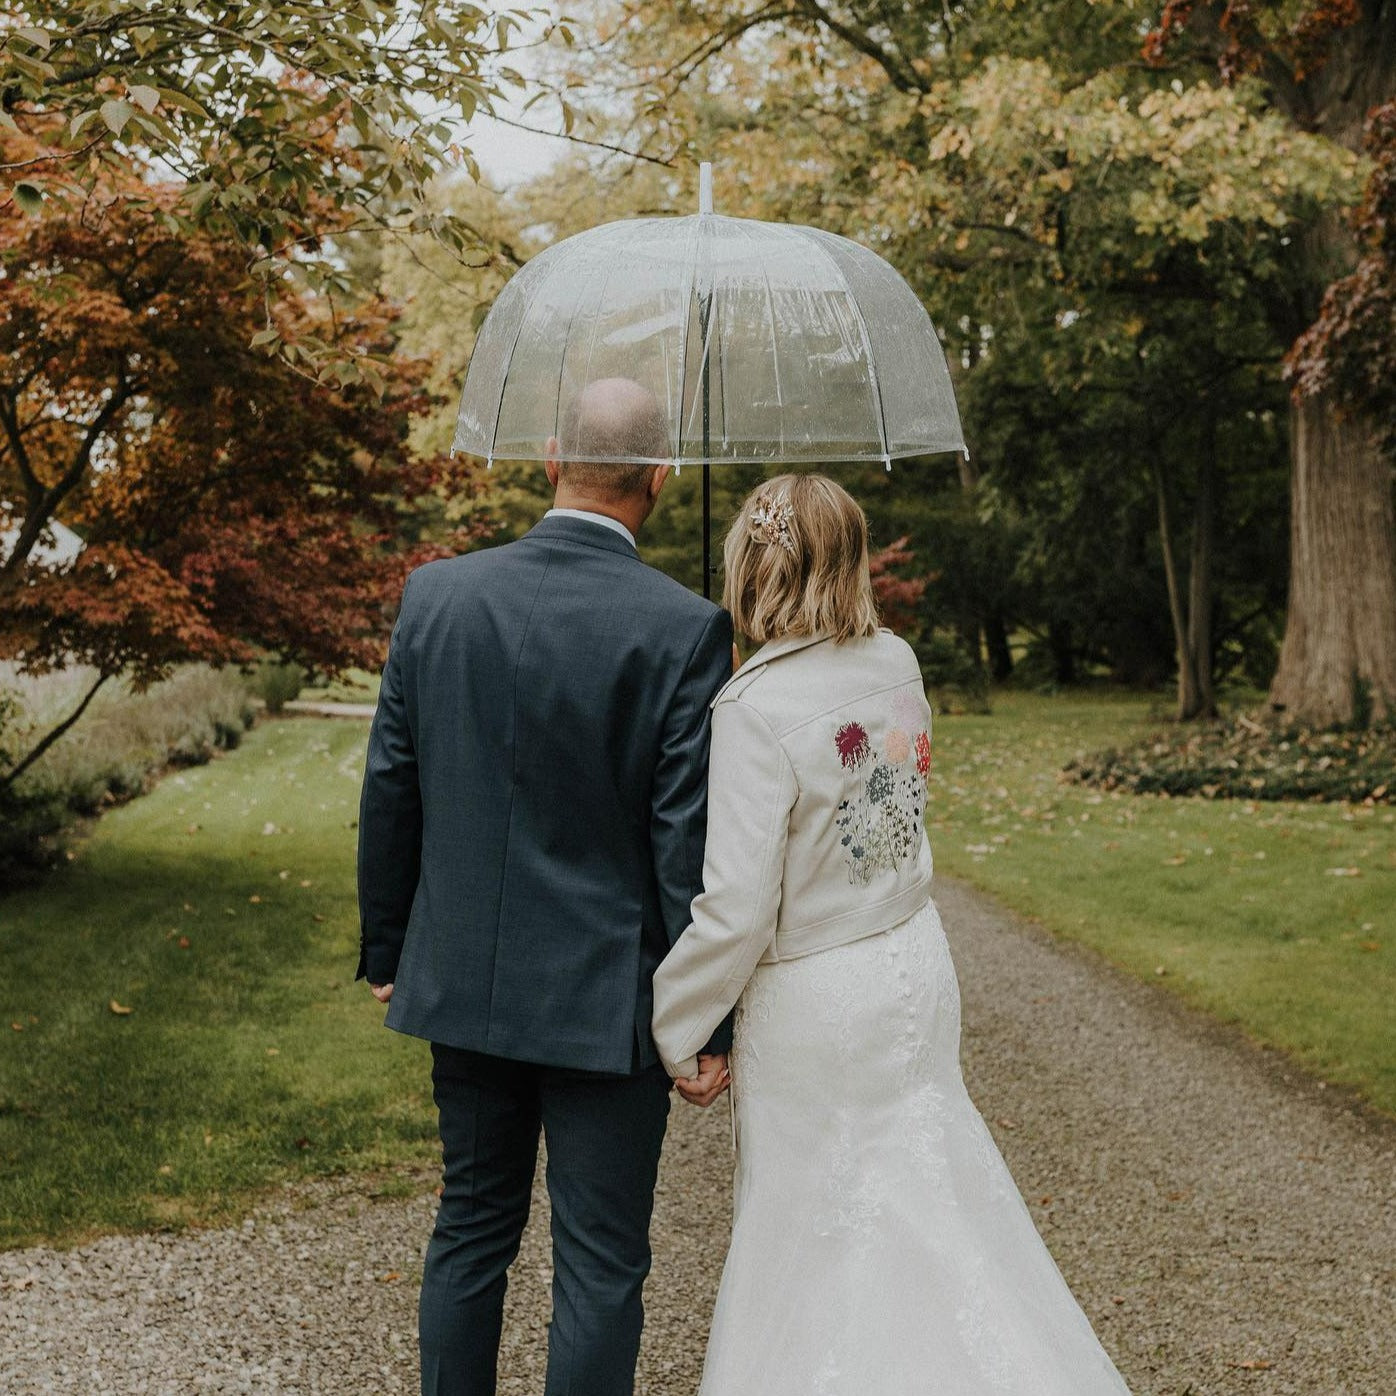 Boho-inspired custom bridal jacket in ivory – a thoughtful and unique wedding gift for the bride, designed to add a touch of personalization to her special day